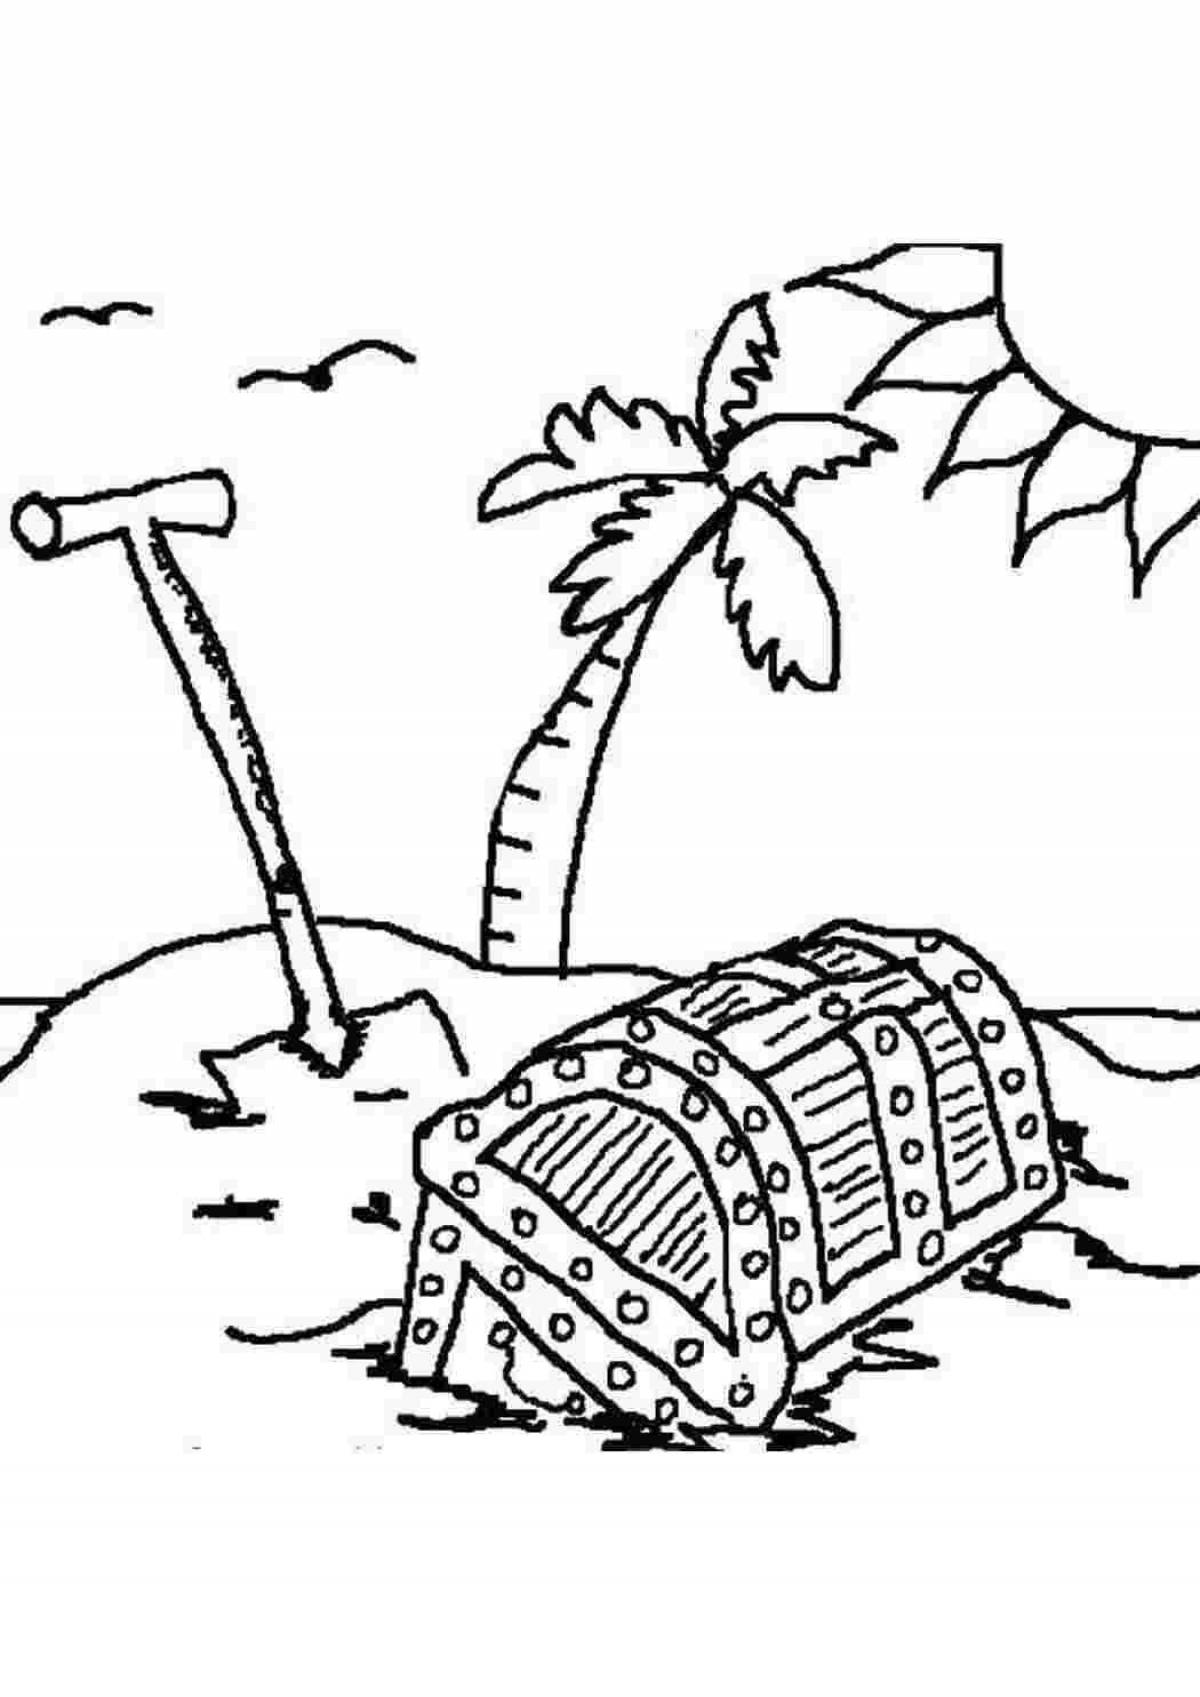 Calming desert island coloring page